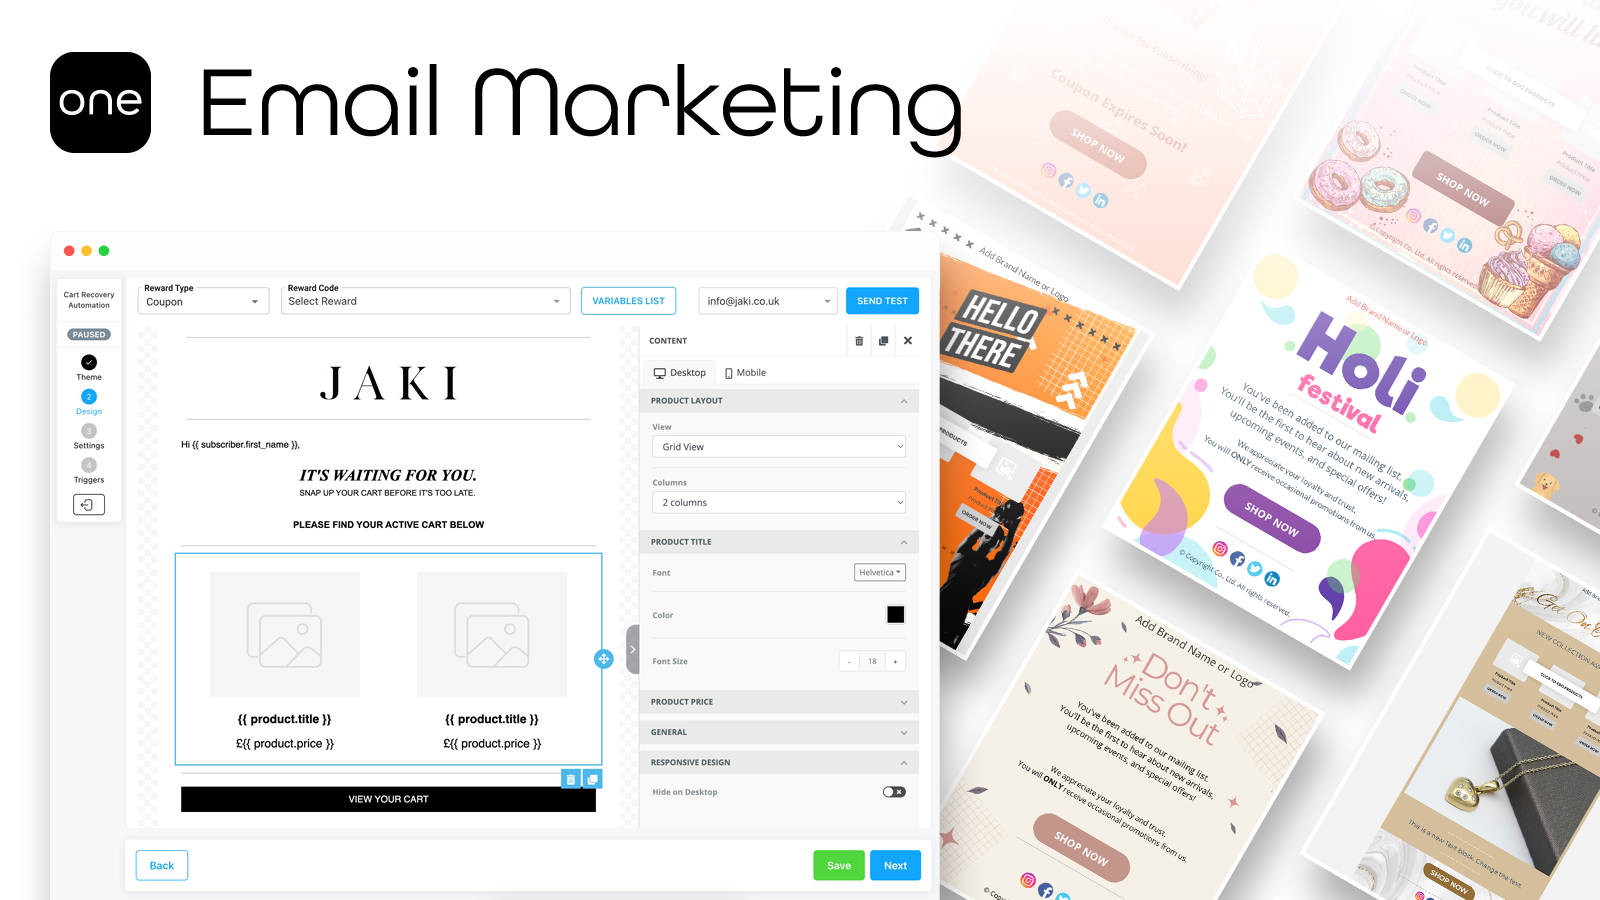 ONE Email Marketing